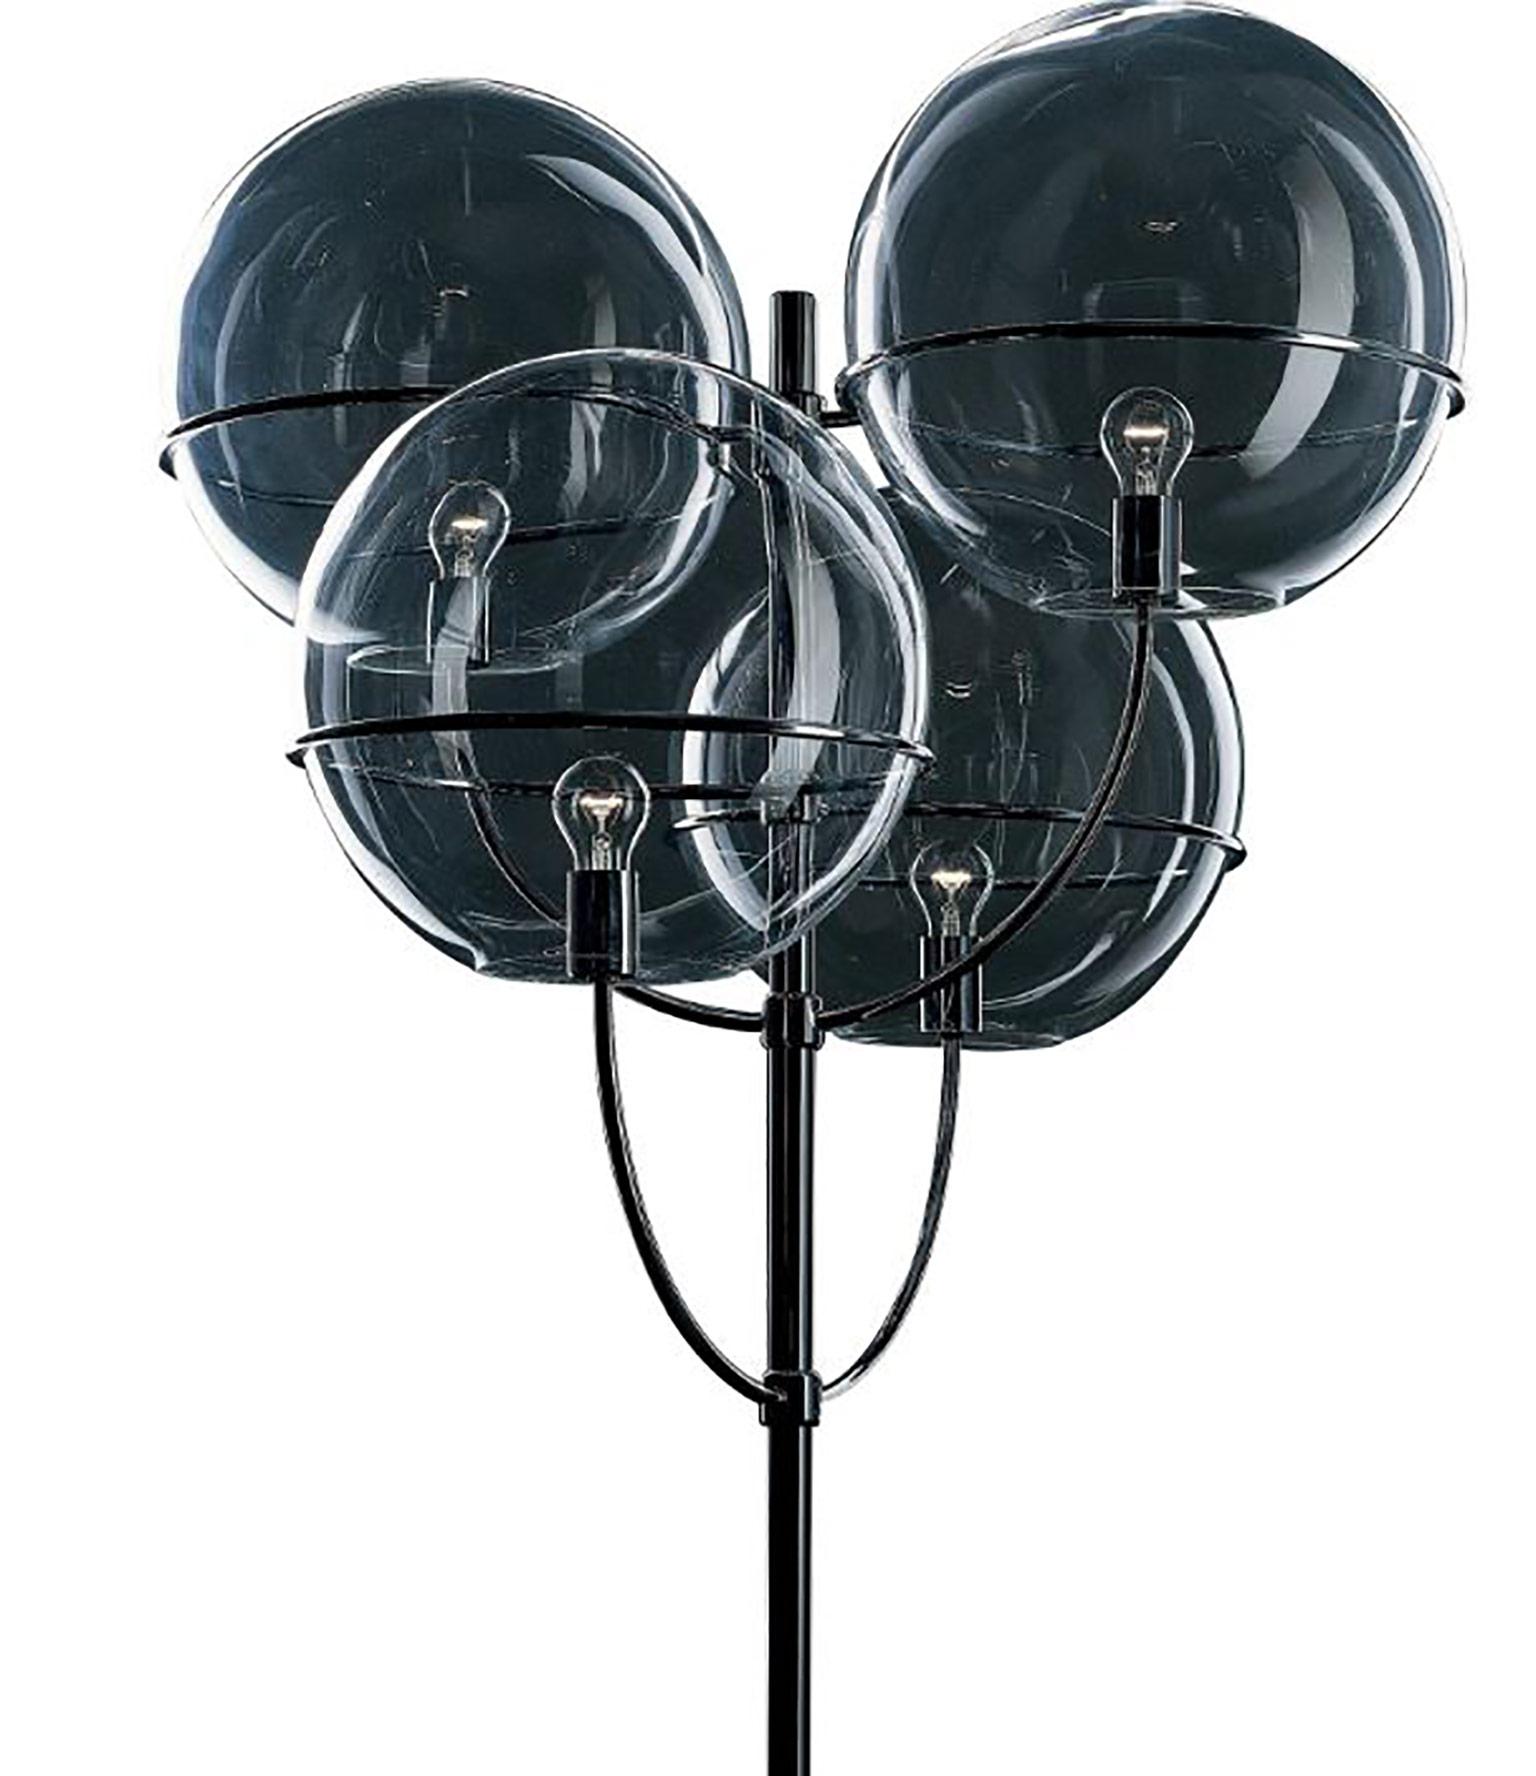 Lyndon-350 outdoor lamp by Vico Magistretti for Oluce. This outdoor fixture contains four globes made from transparent polycarbonate. The metal body is zinc-plated with a black lacquered finish. The perfect ambient lighting for walkways. Available